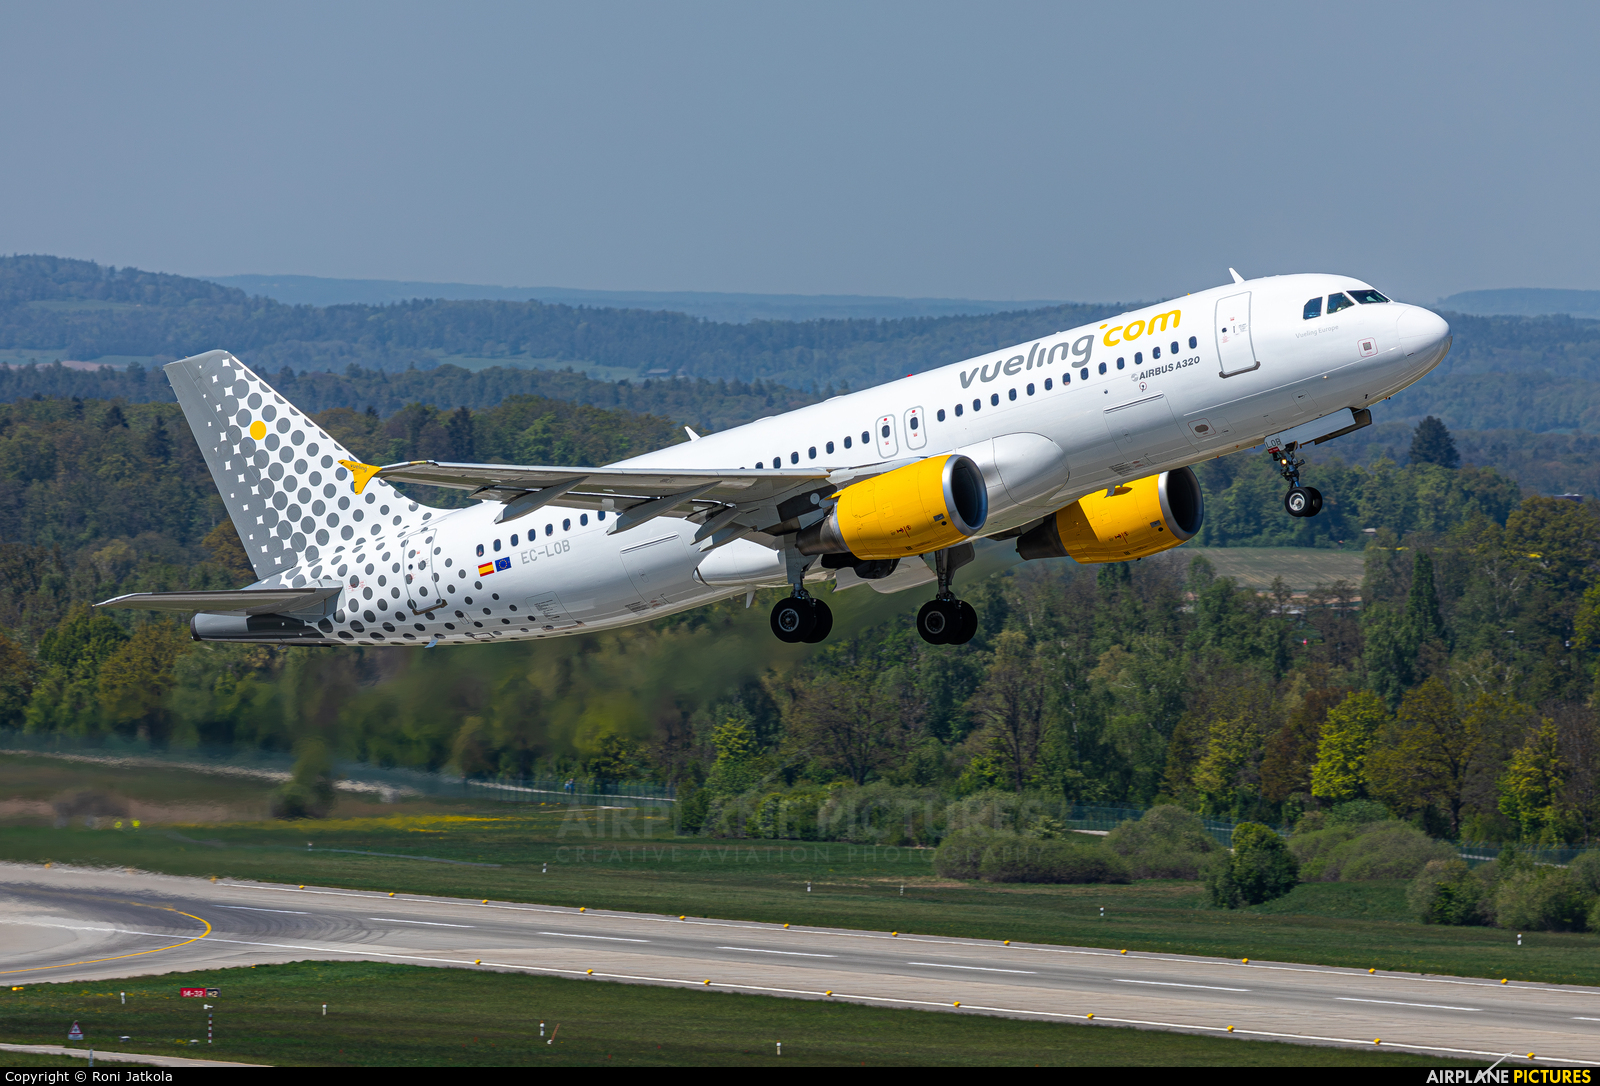 Vueling Airlines EC-LOB aircraft at Zurich